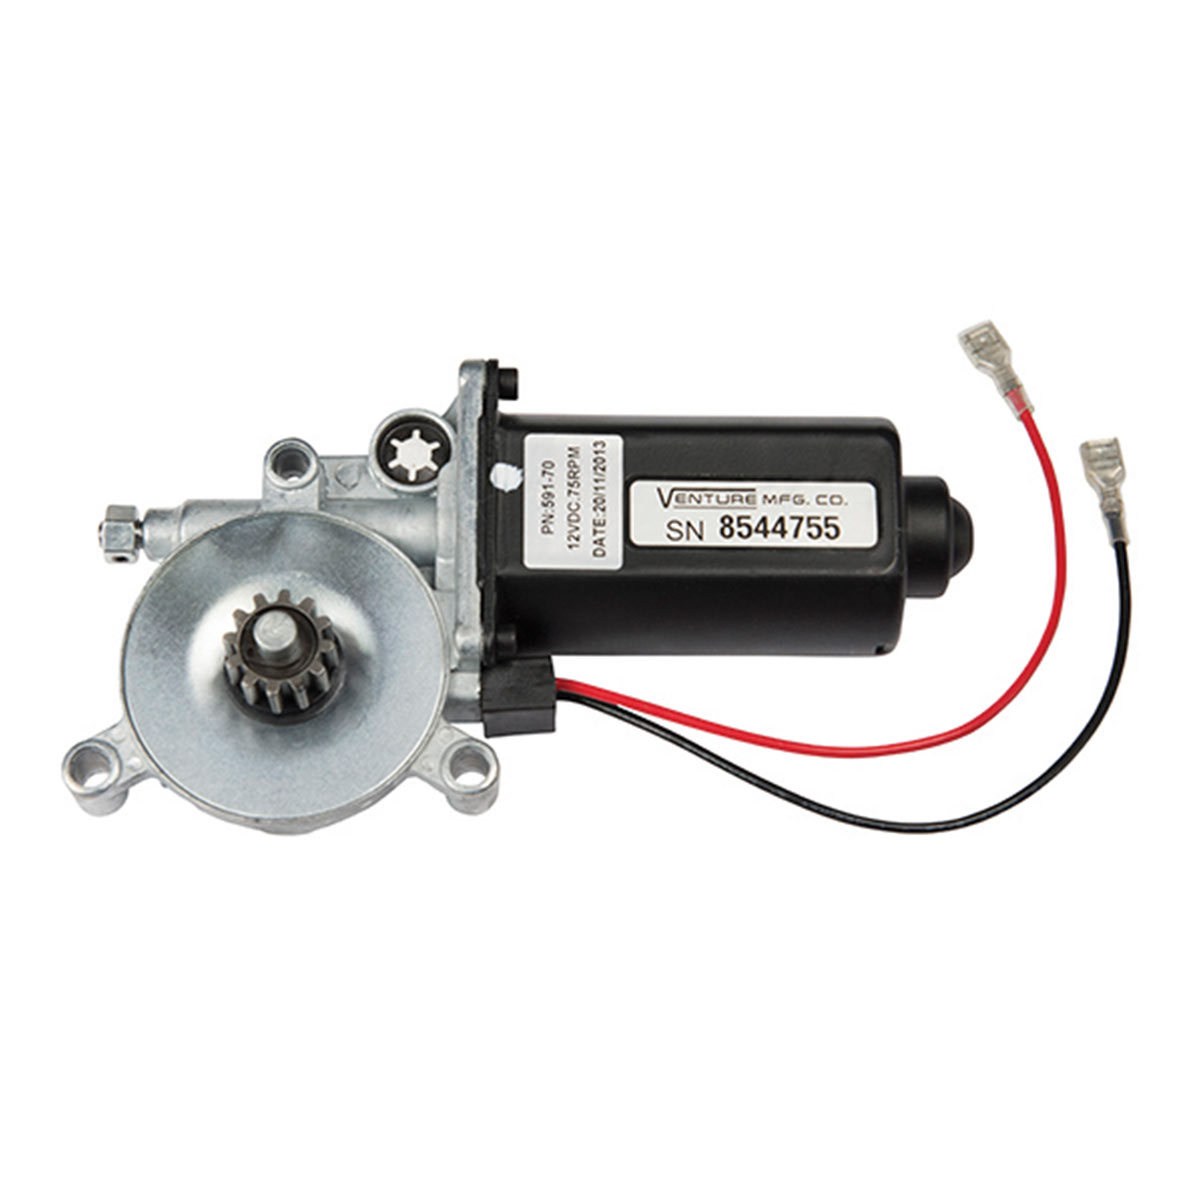 Flat and Short Assemblies Zinger 266149 RV Power Awning Motor Replacement Universal Motor Compatible for Solera Power Awnings,12-Volt DC and 75-RPM,Including Pitched 